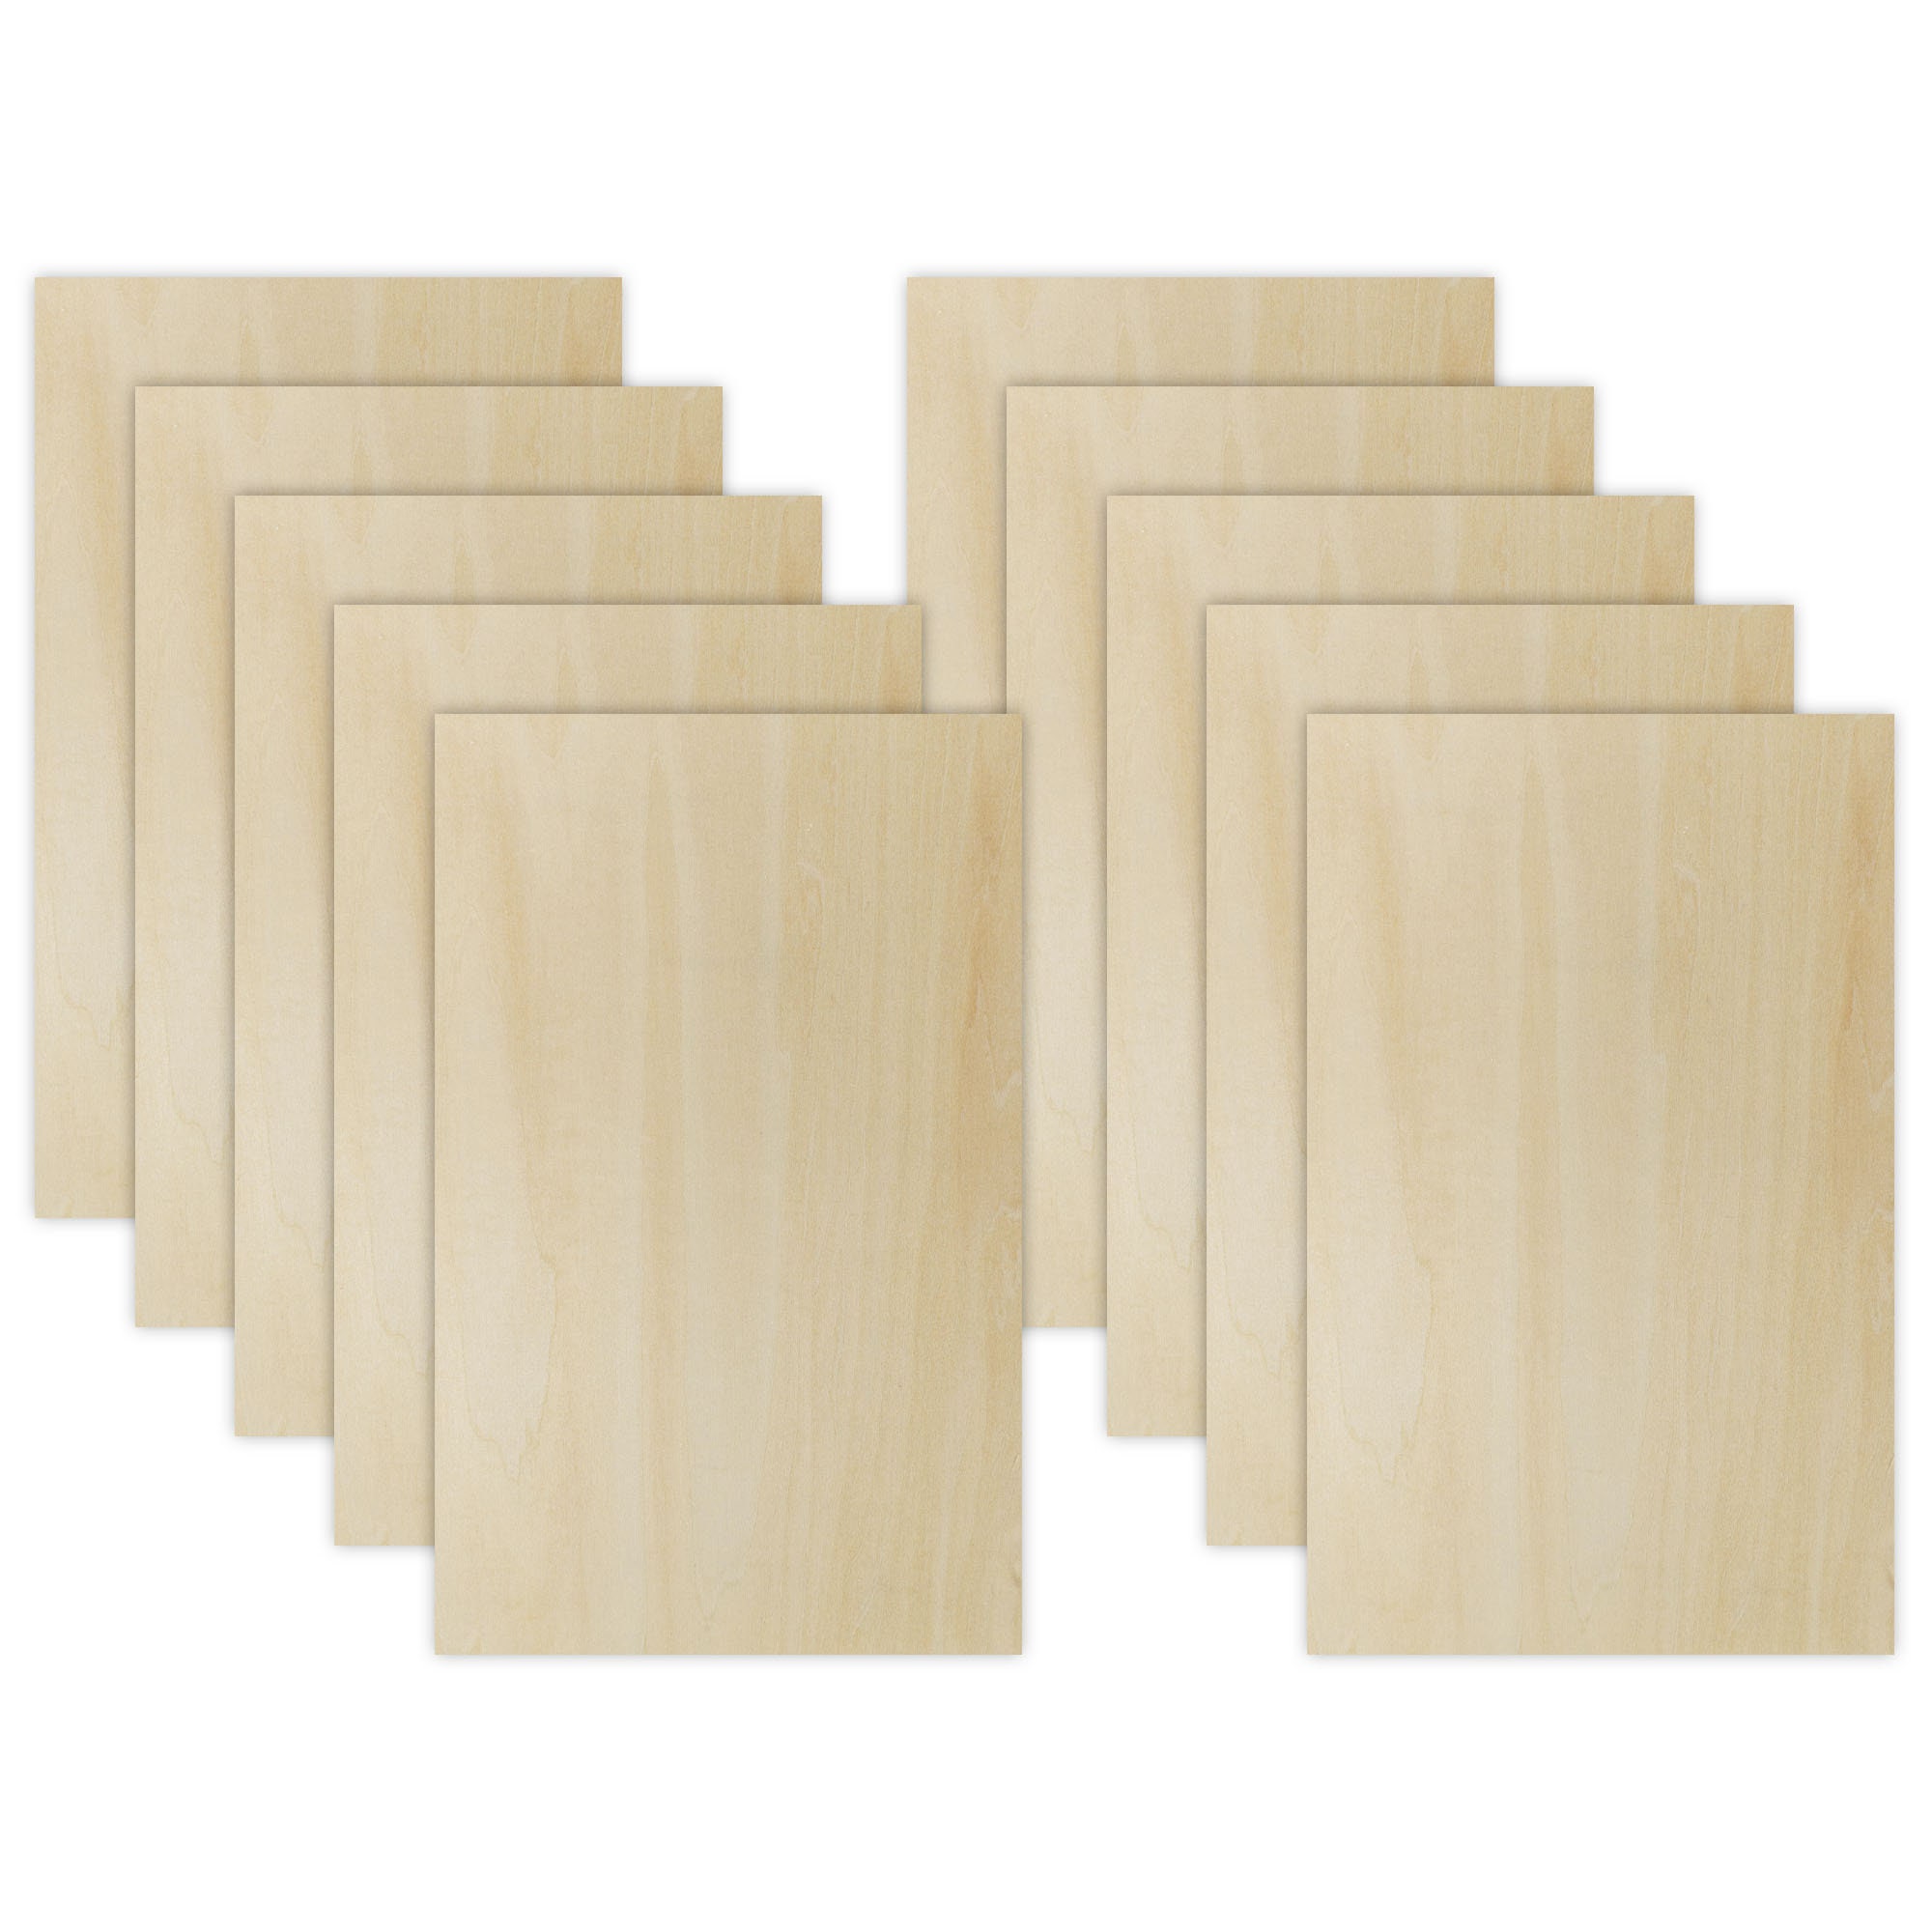 Basswood Laser Plywood 1/4, 12x18 Inch Sheets, 6mm Laser Wood, CNC